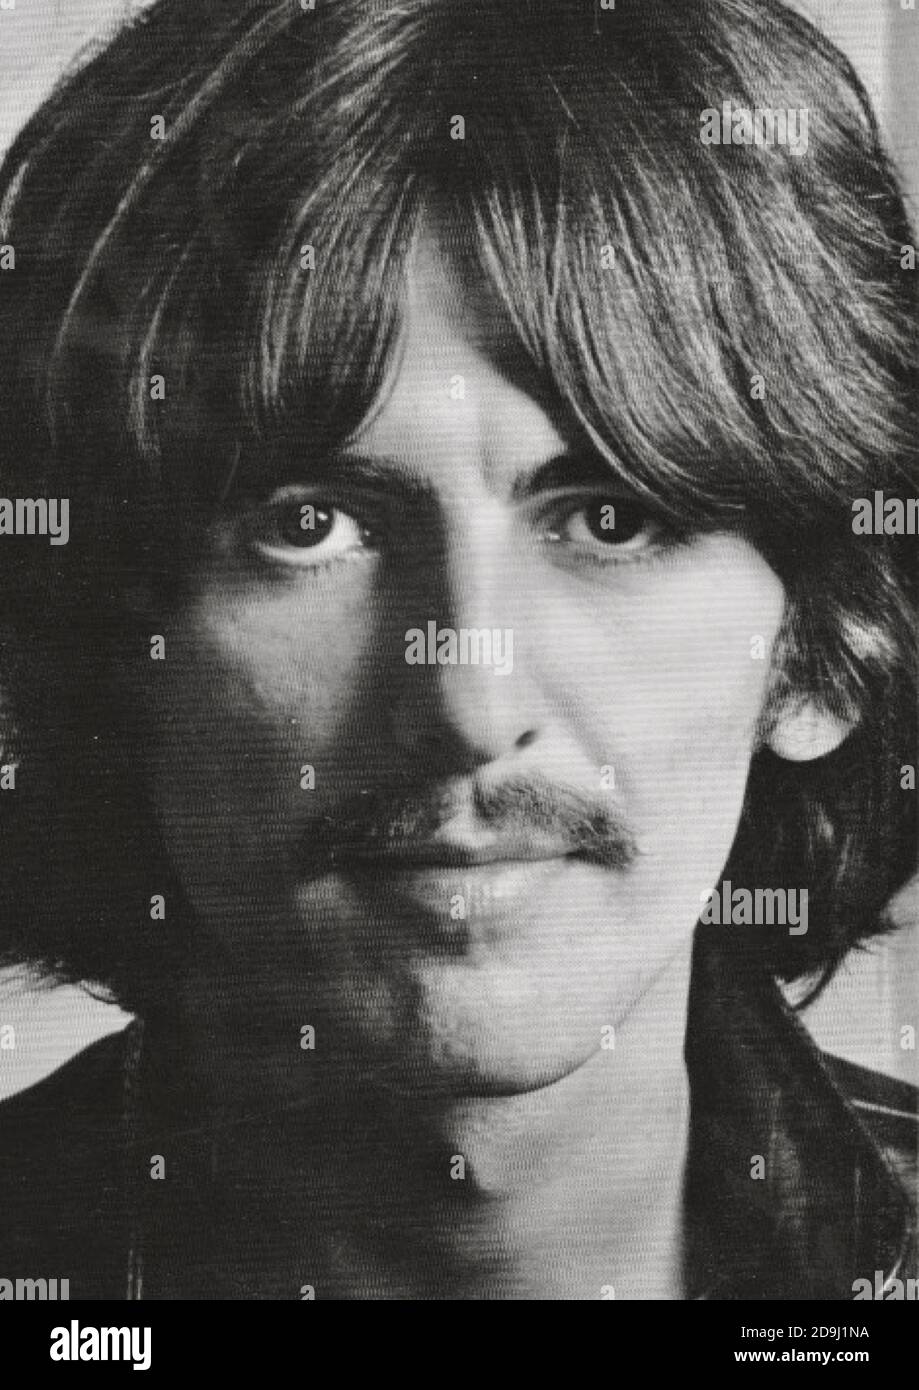 Portrait of George Harrison as given to members of the beatles fan club and inserts in the white album. Stock Photo